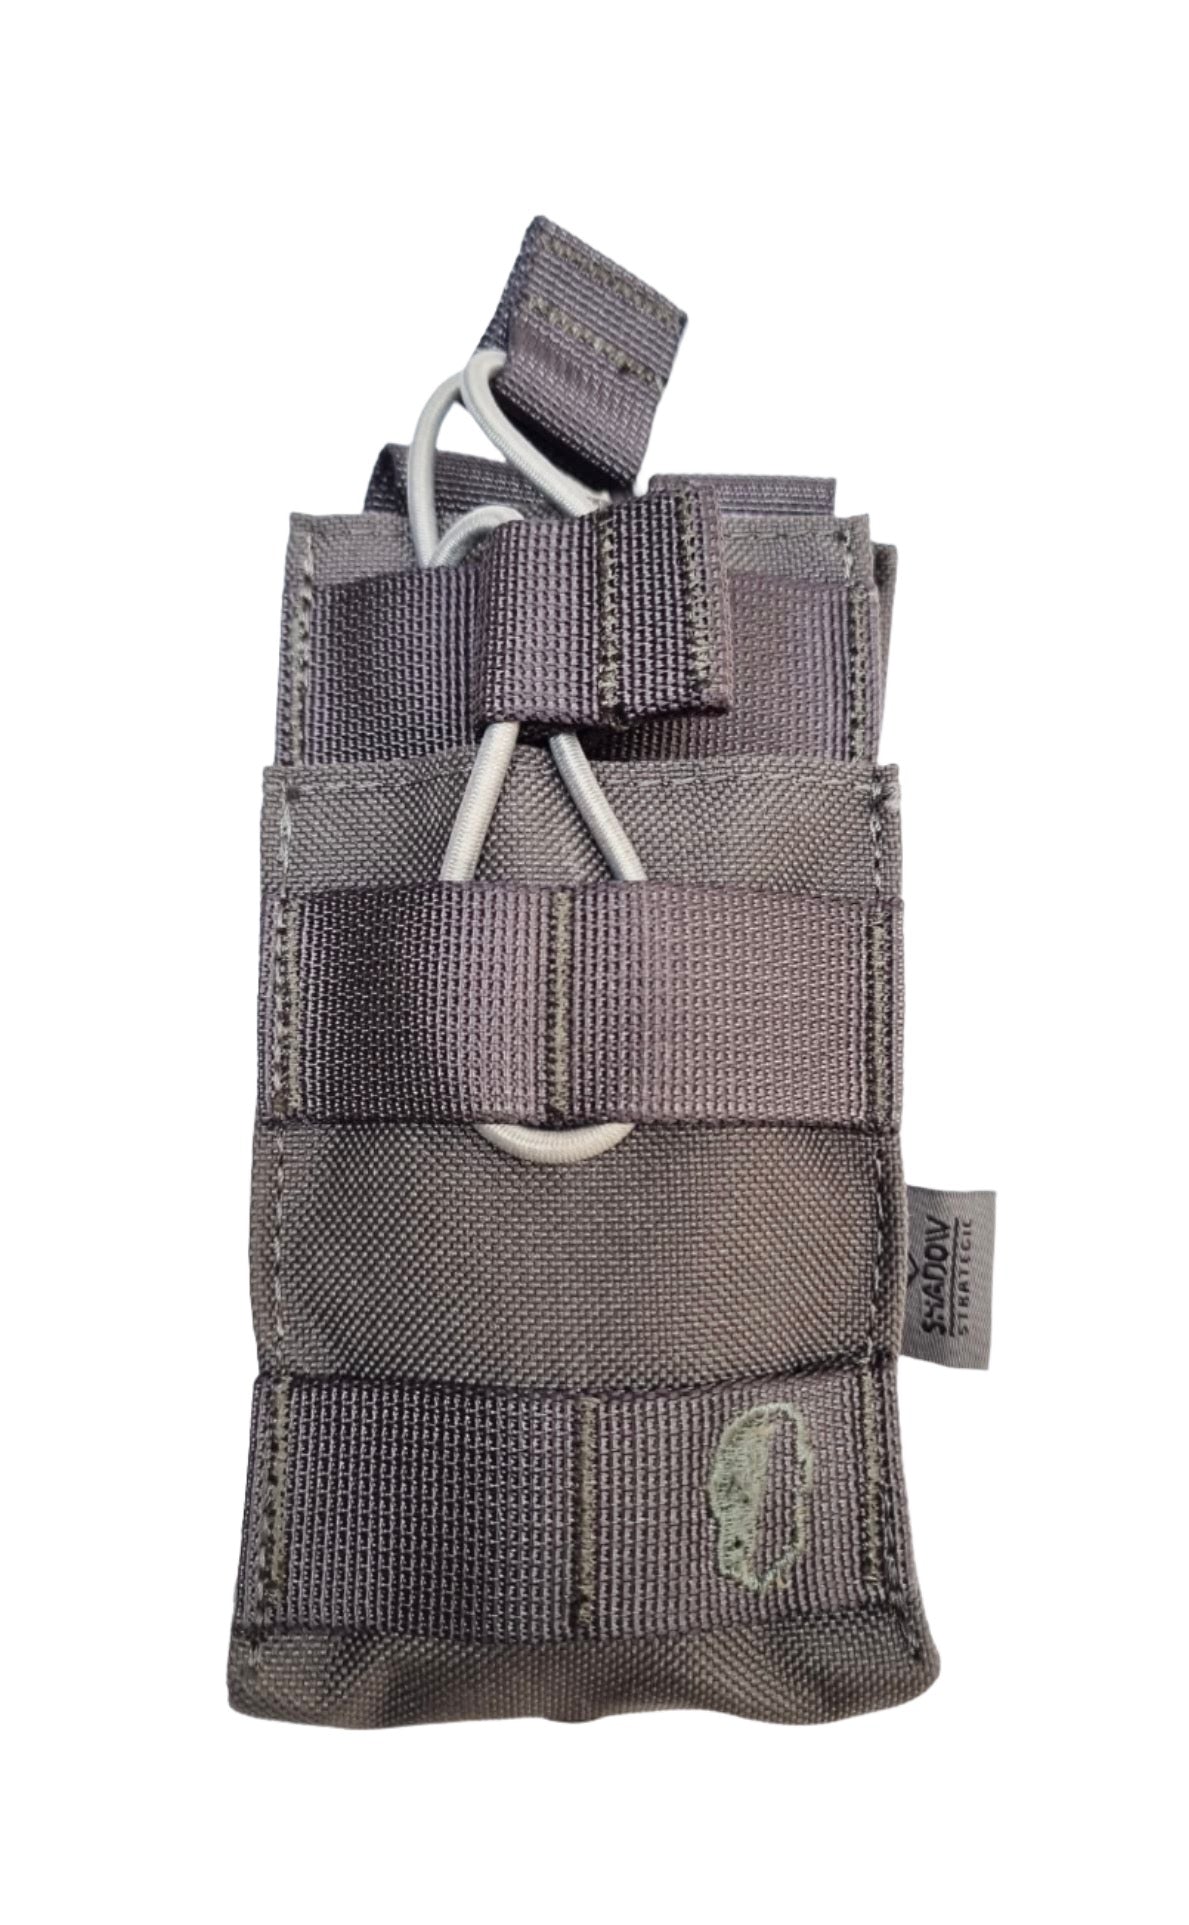 SHS - 1090 STACKER OPEN-TOP MAG POUCH SINGLE COLOUR WOLF GREY